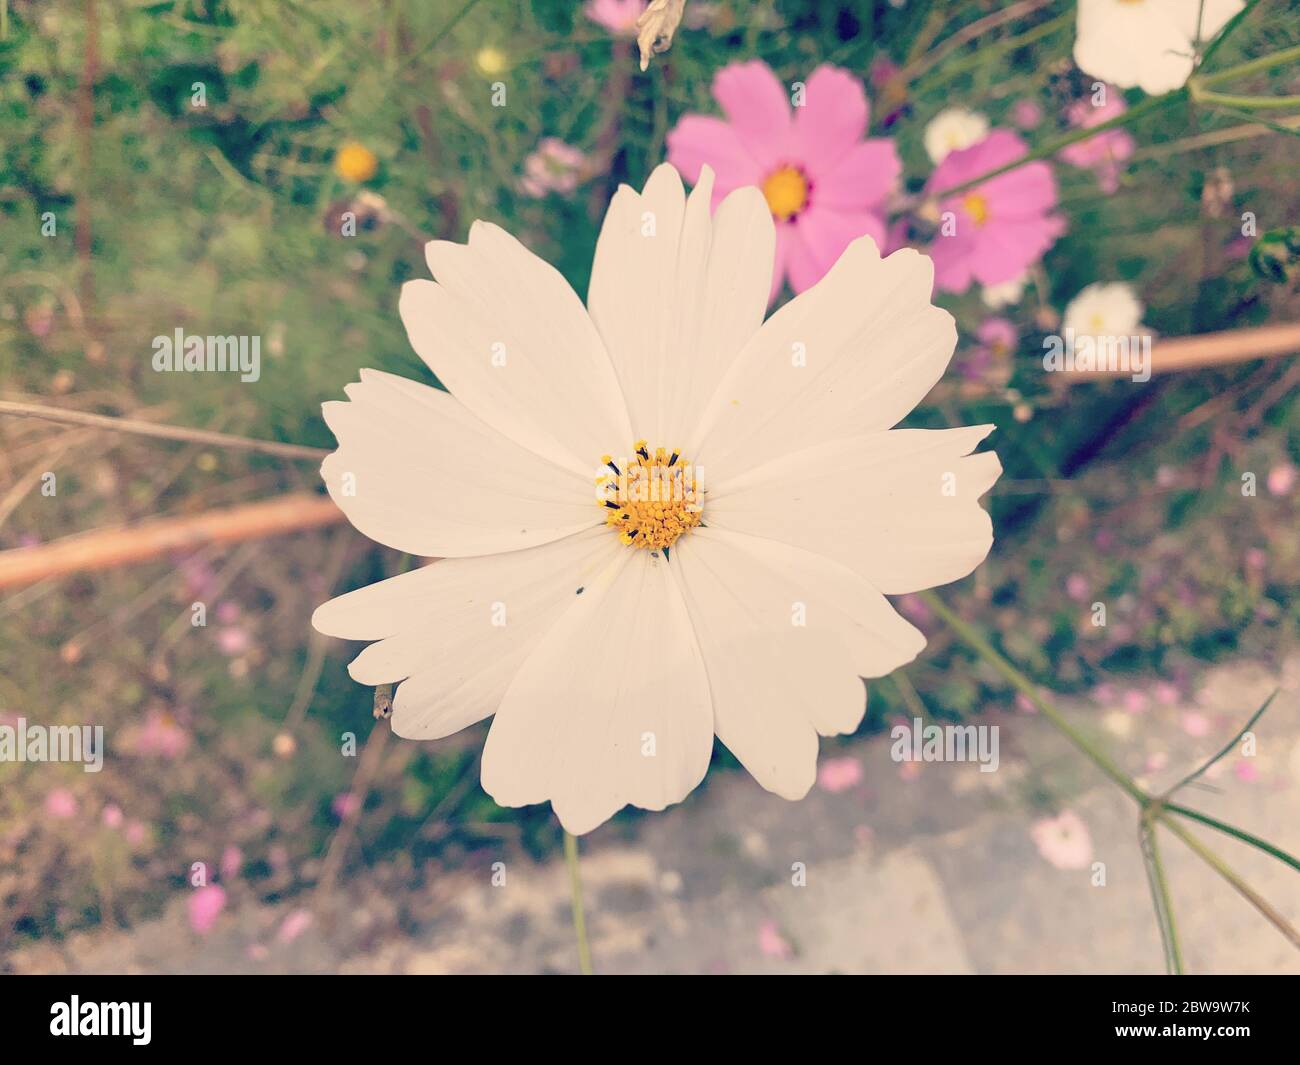 A white daisy flower in a summer day. Stock Photo